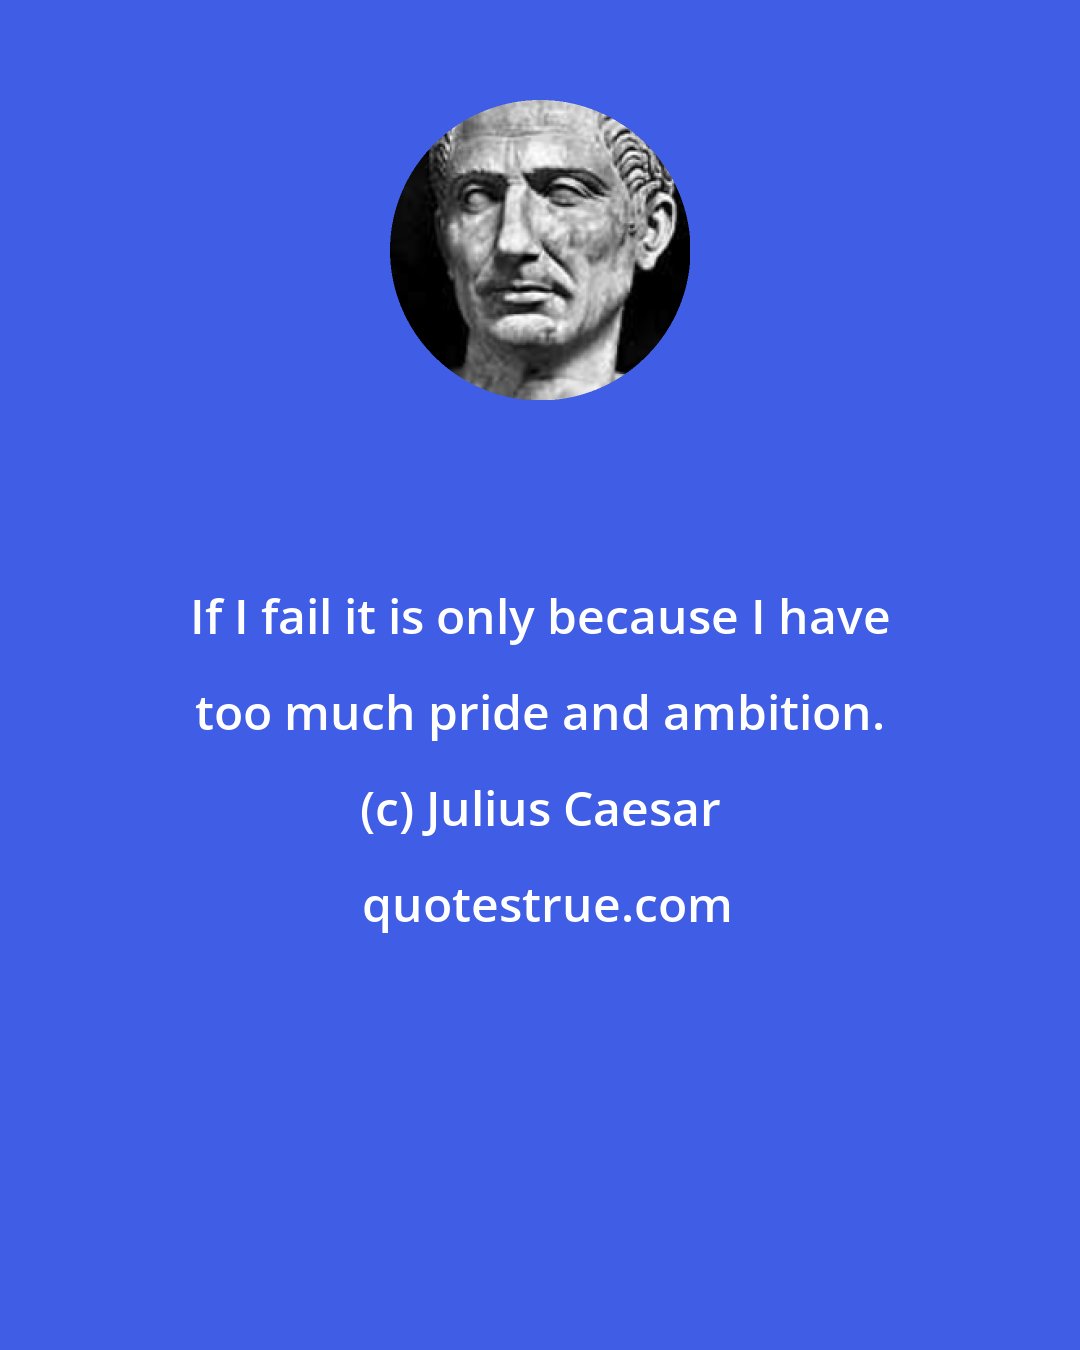 Julius Caesar: If I fail it is only because I have too much pride and ambition.